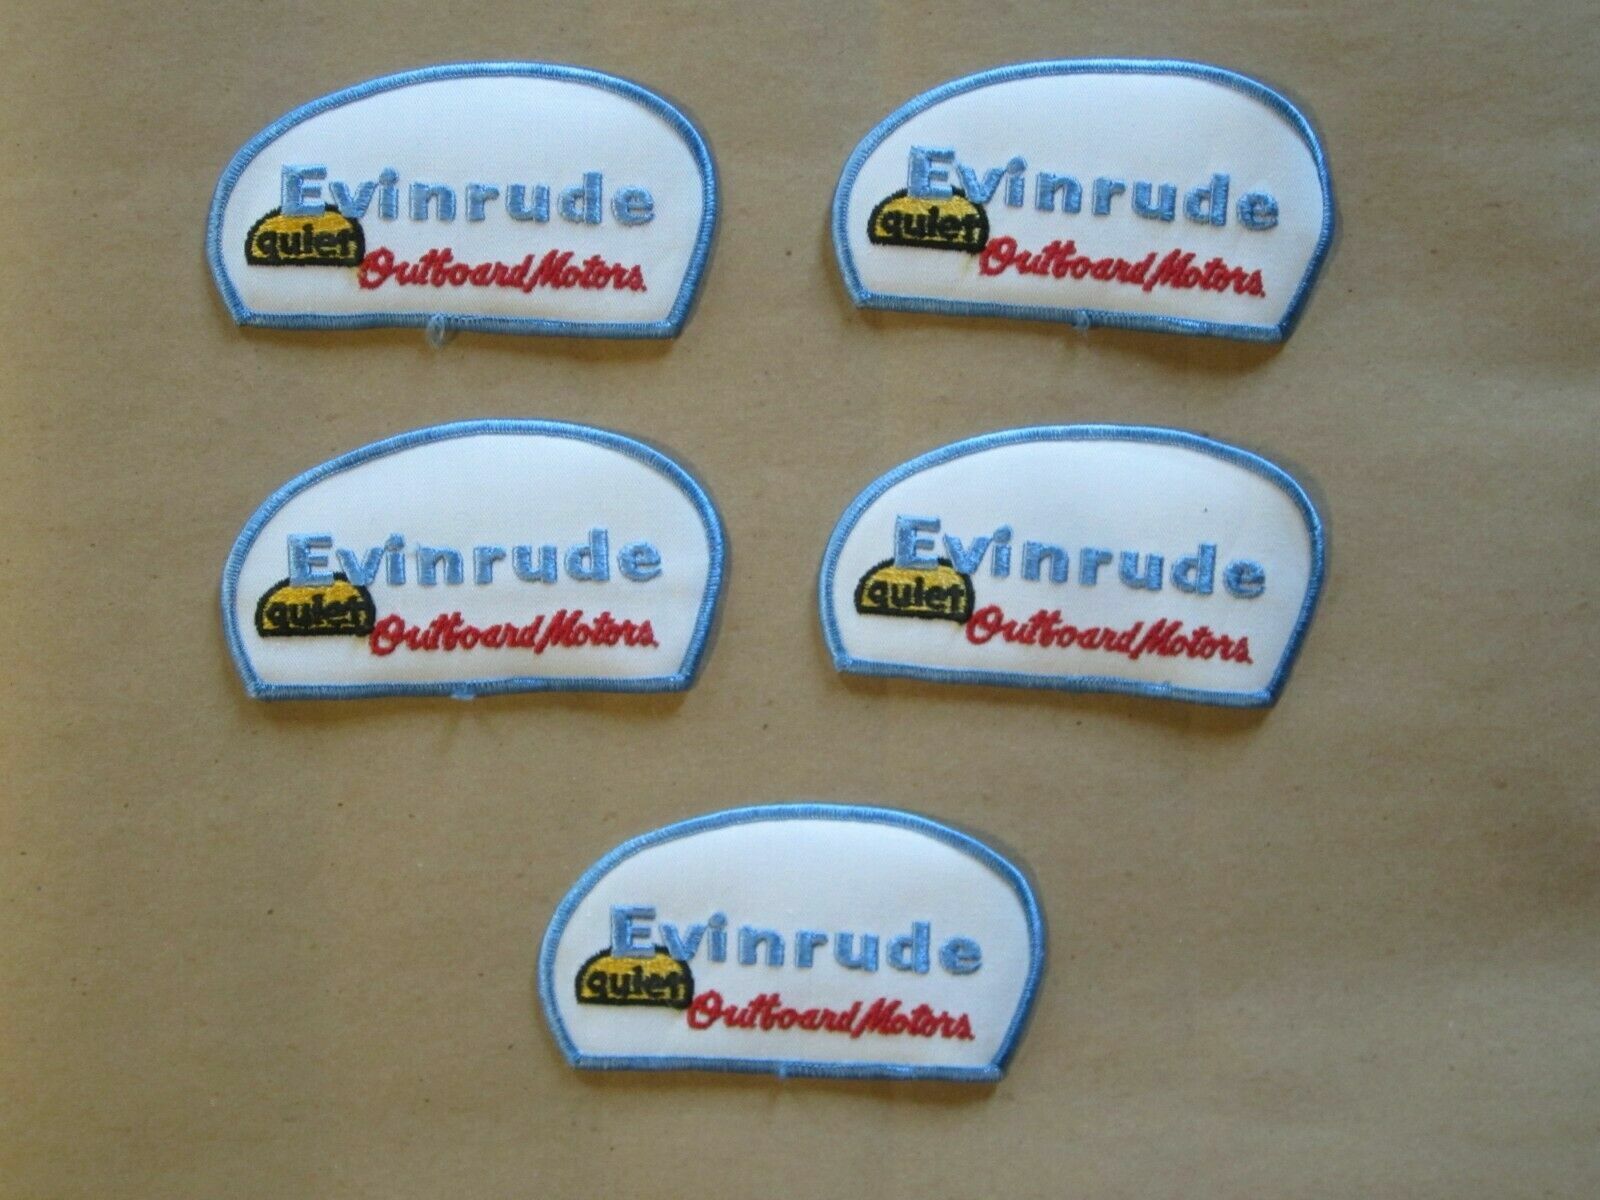 Vintage NOS Evinrude Quiet Outboard Motors Embroidered Patch 4.75\